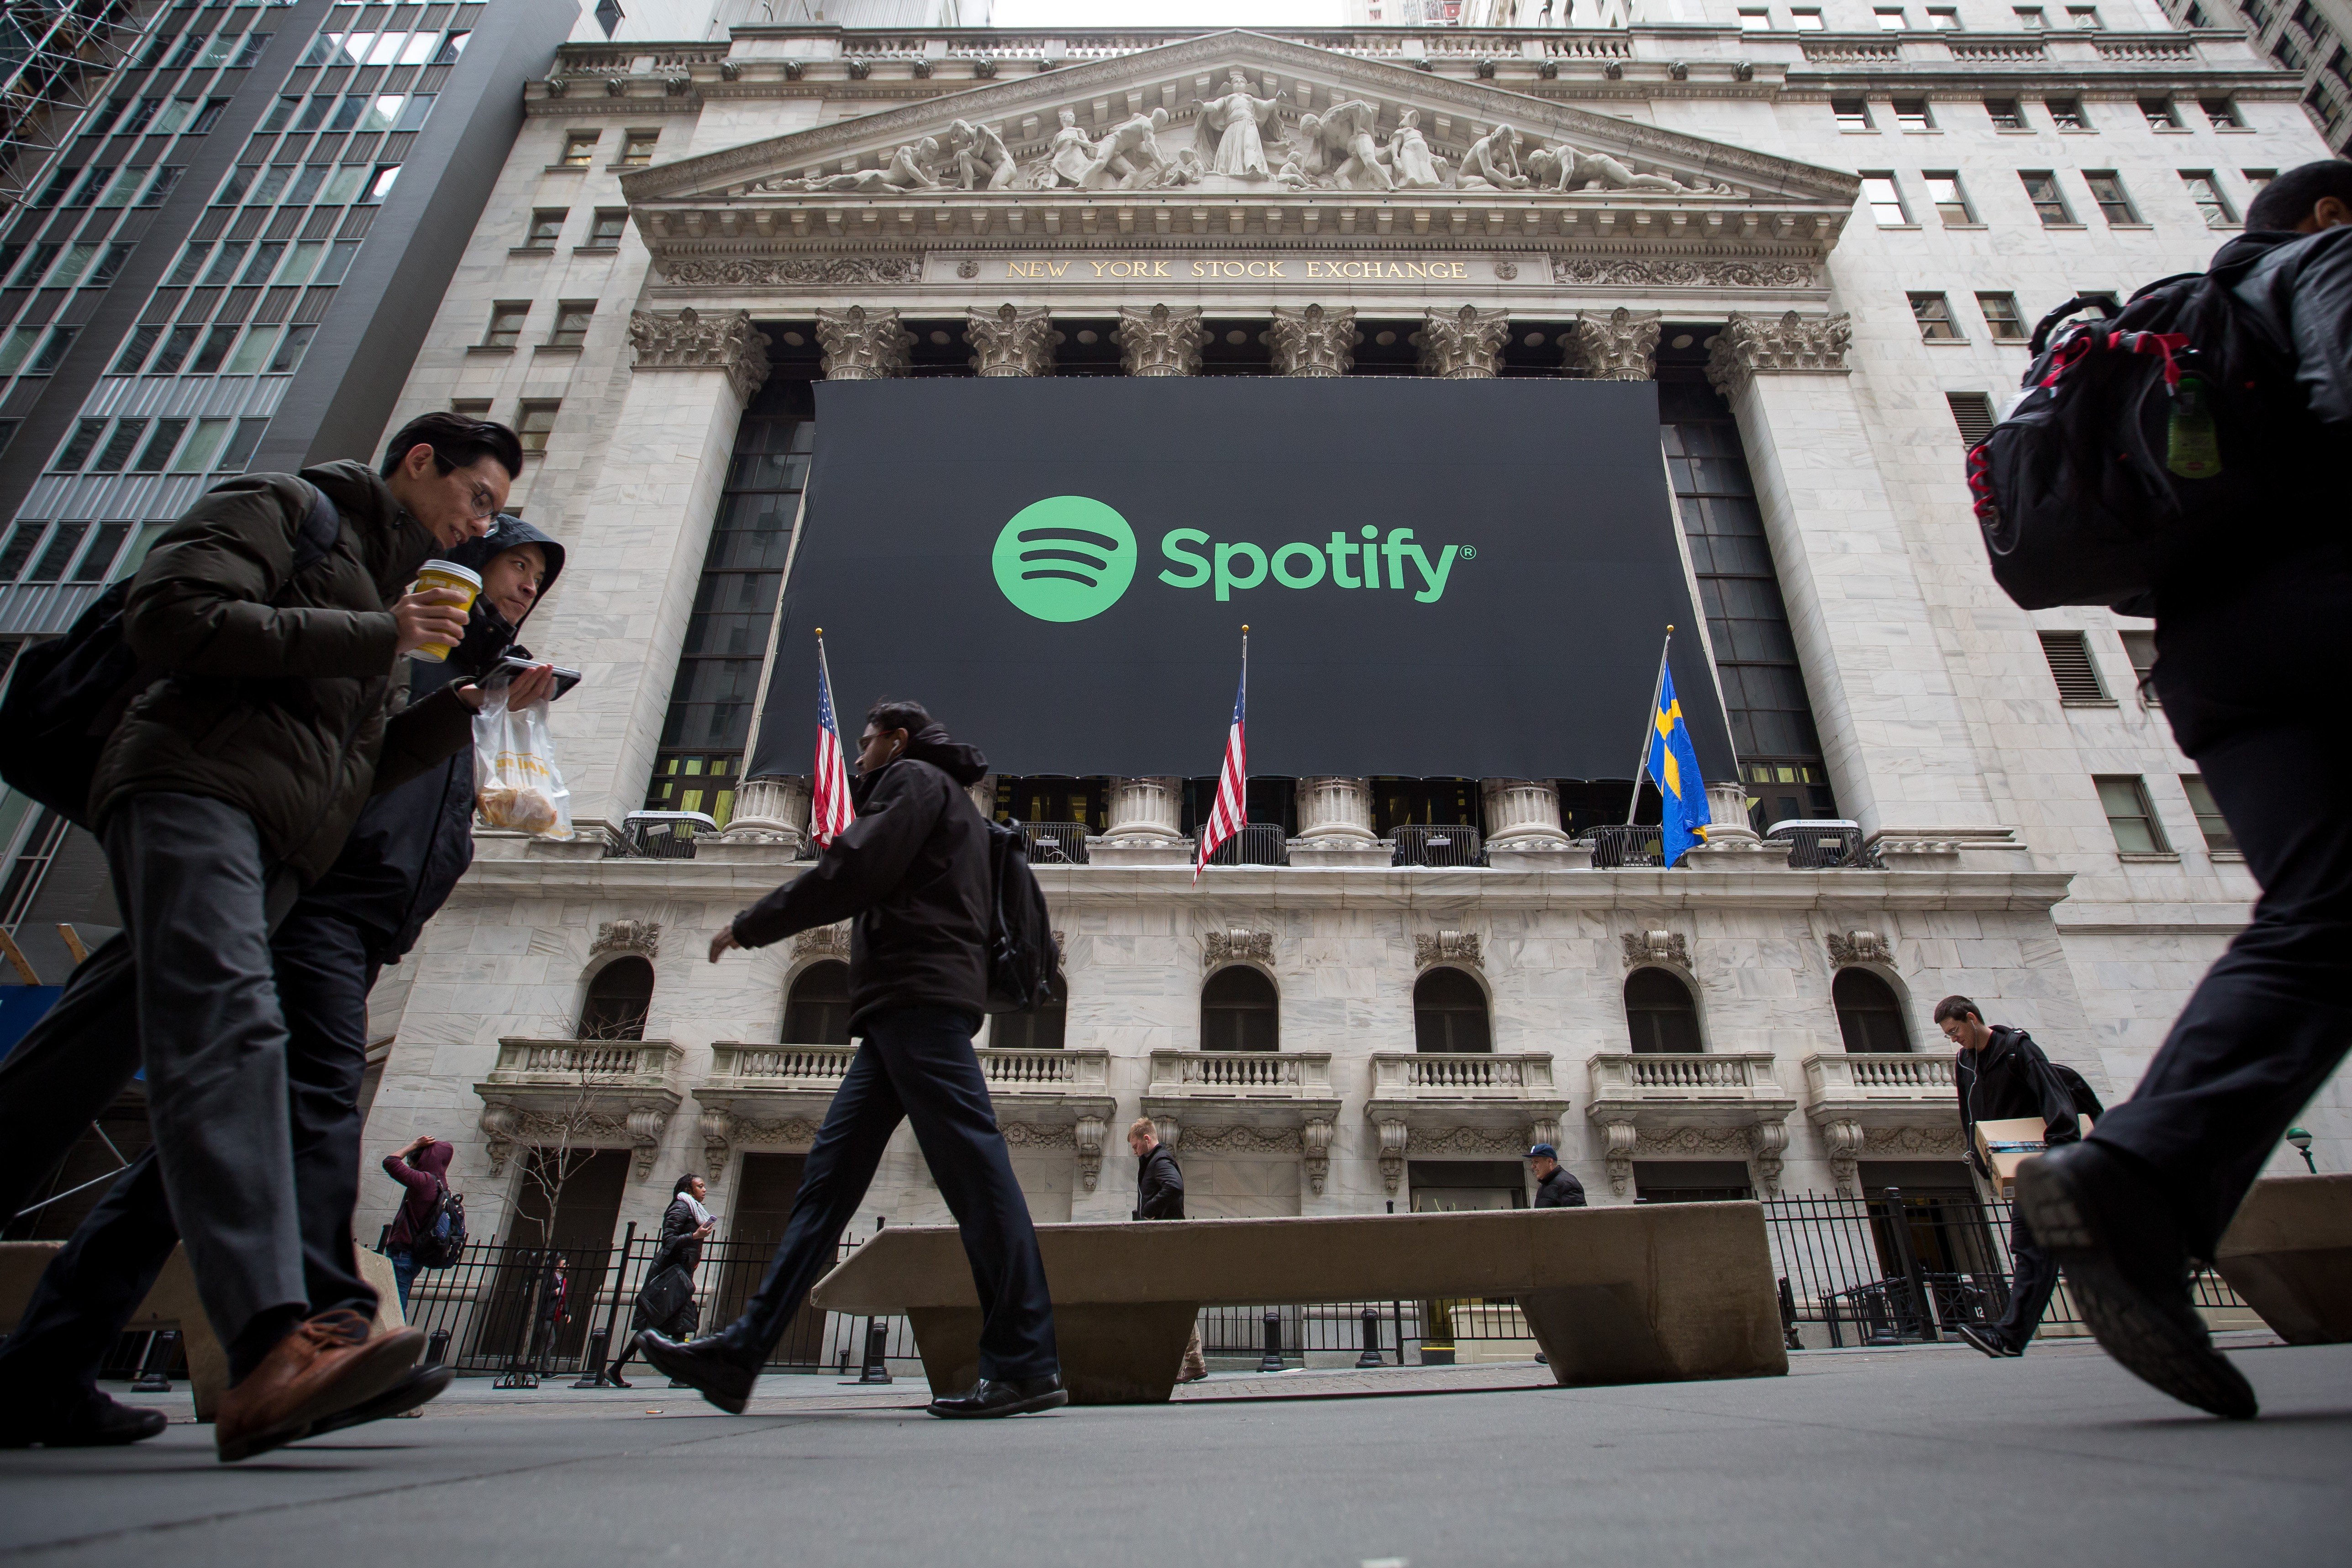 Spotify’s shares ended up 12.9 per cent higher on its first day of trading on the New York Stock Exchange, on April 3, a smooth debut that could pave the way for other companies looking to go public without the aid of Wall Street underwriters. Photo: Bloomberg